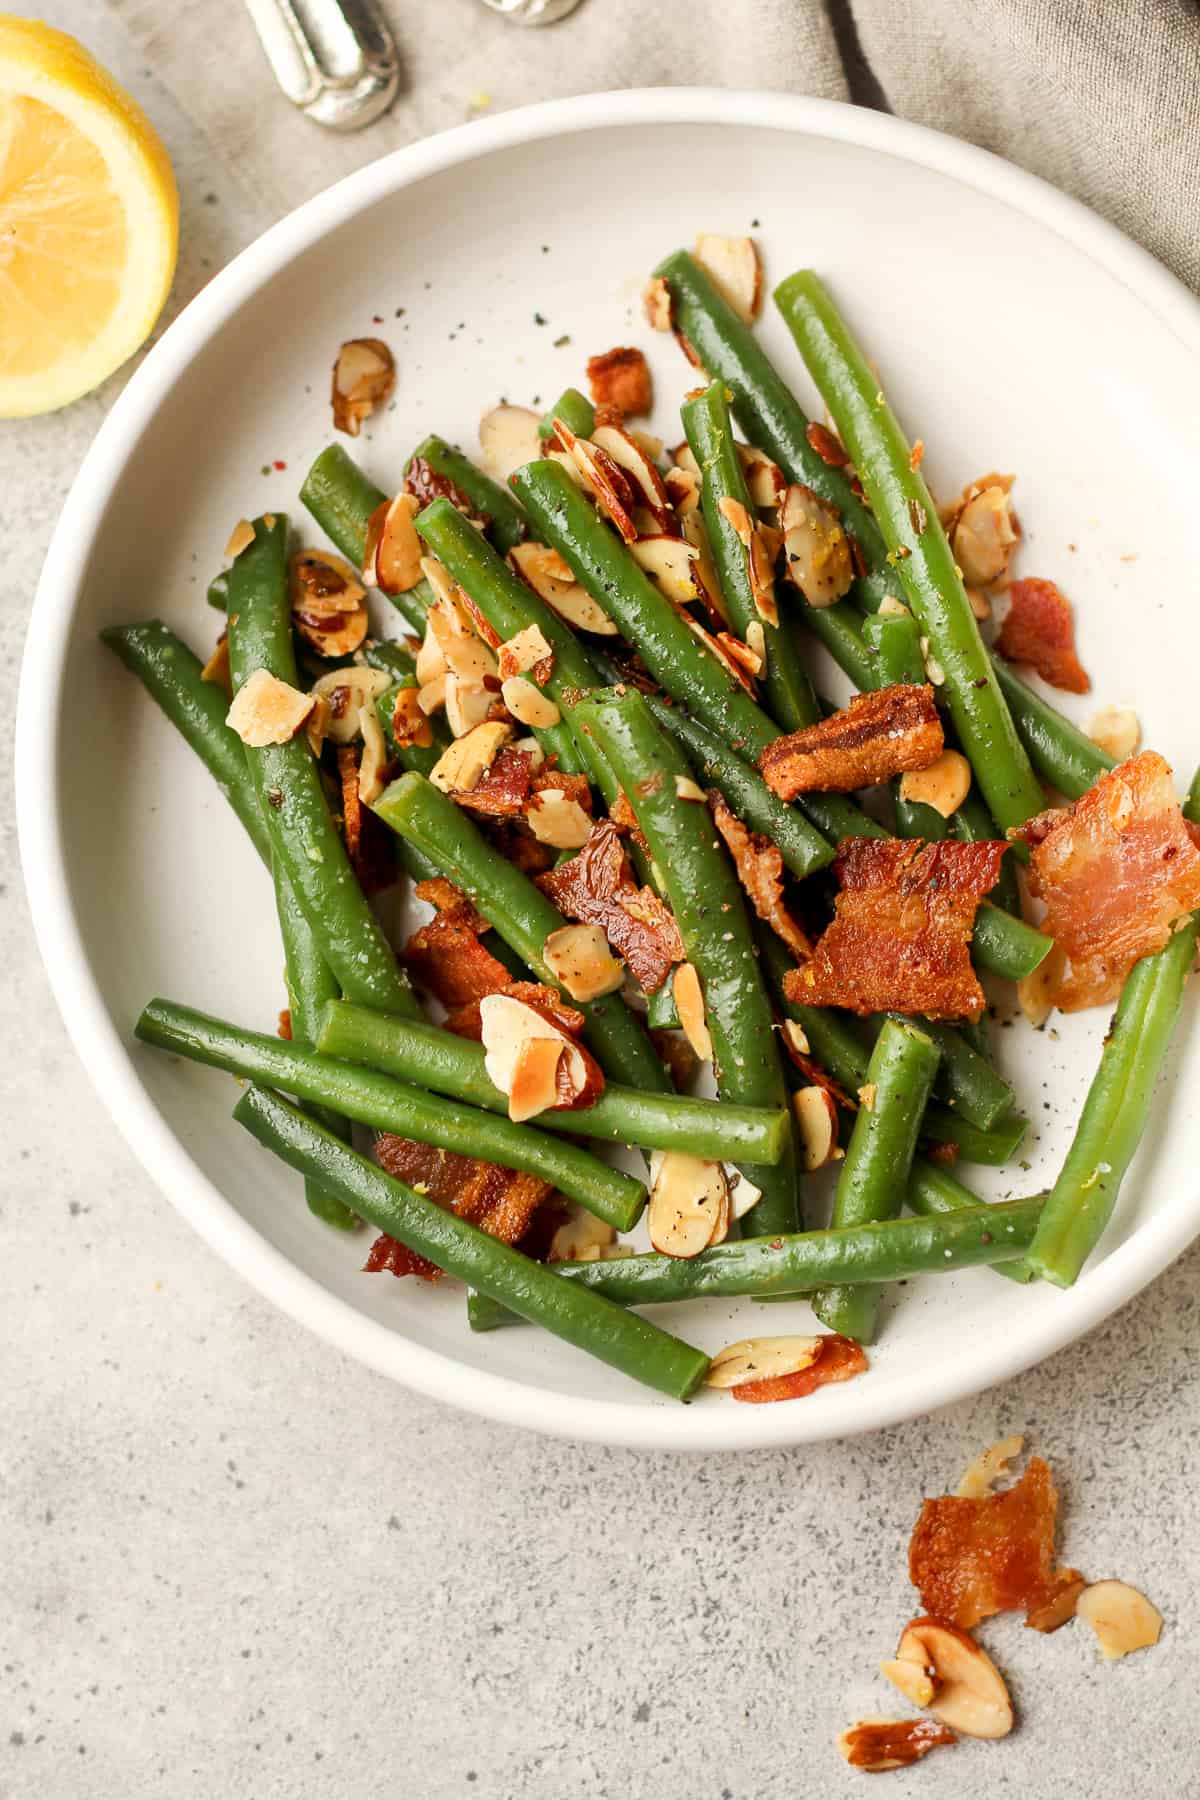 A serving plate of the green bean almandine with bacon on top.